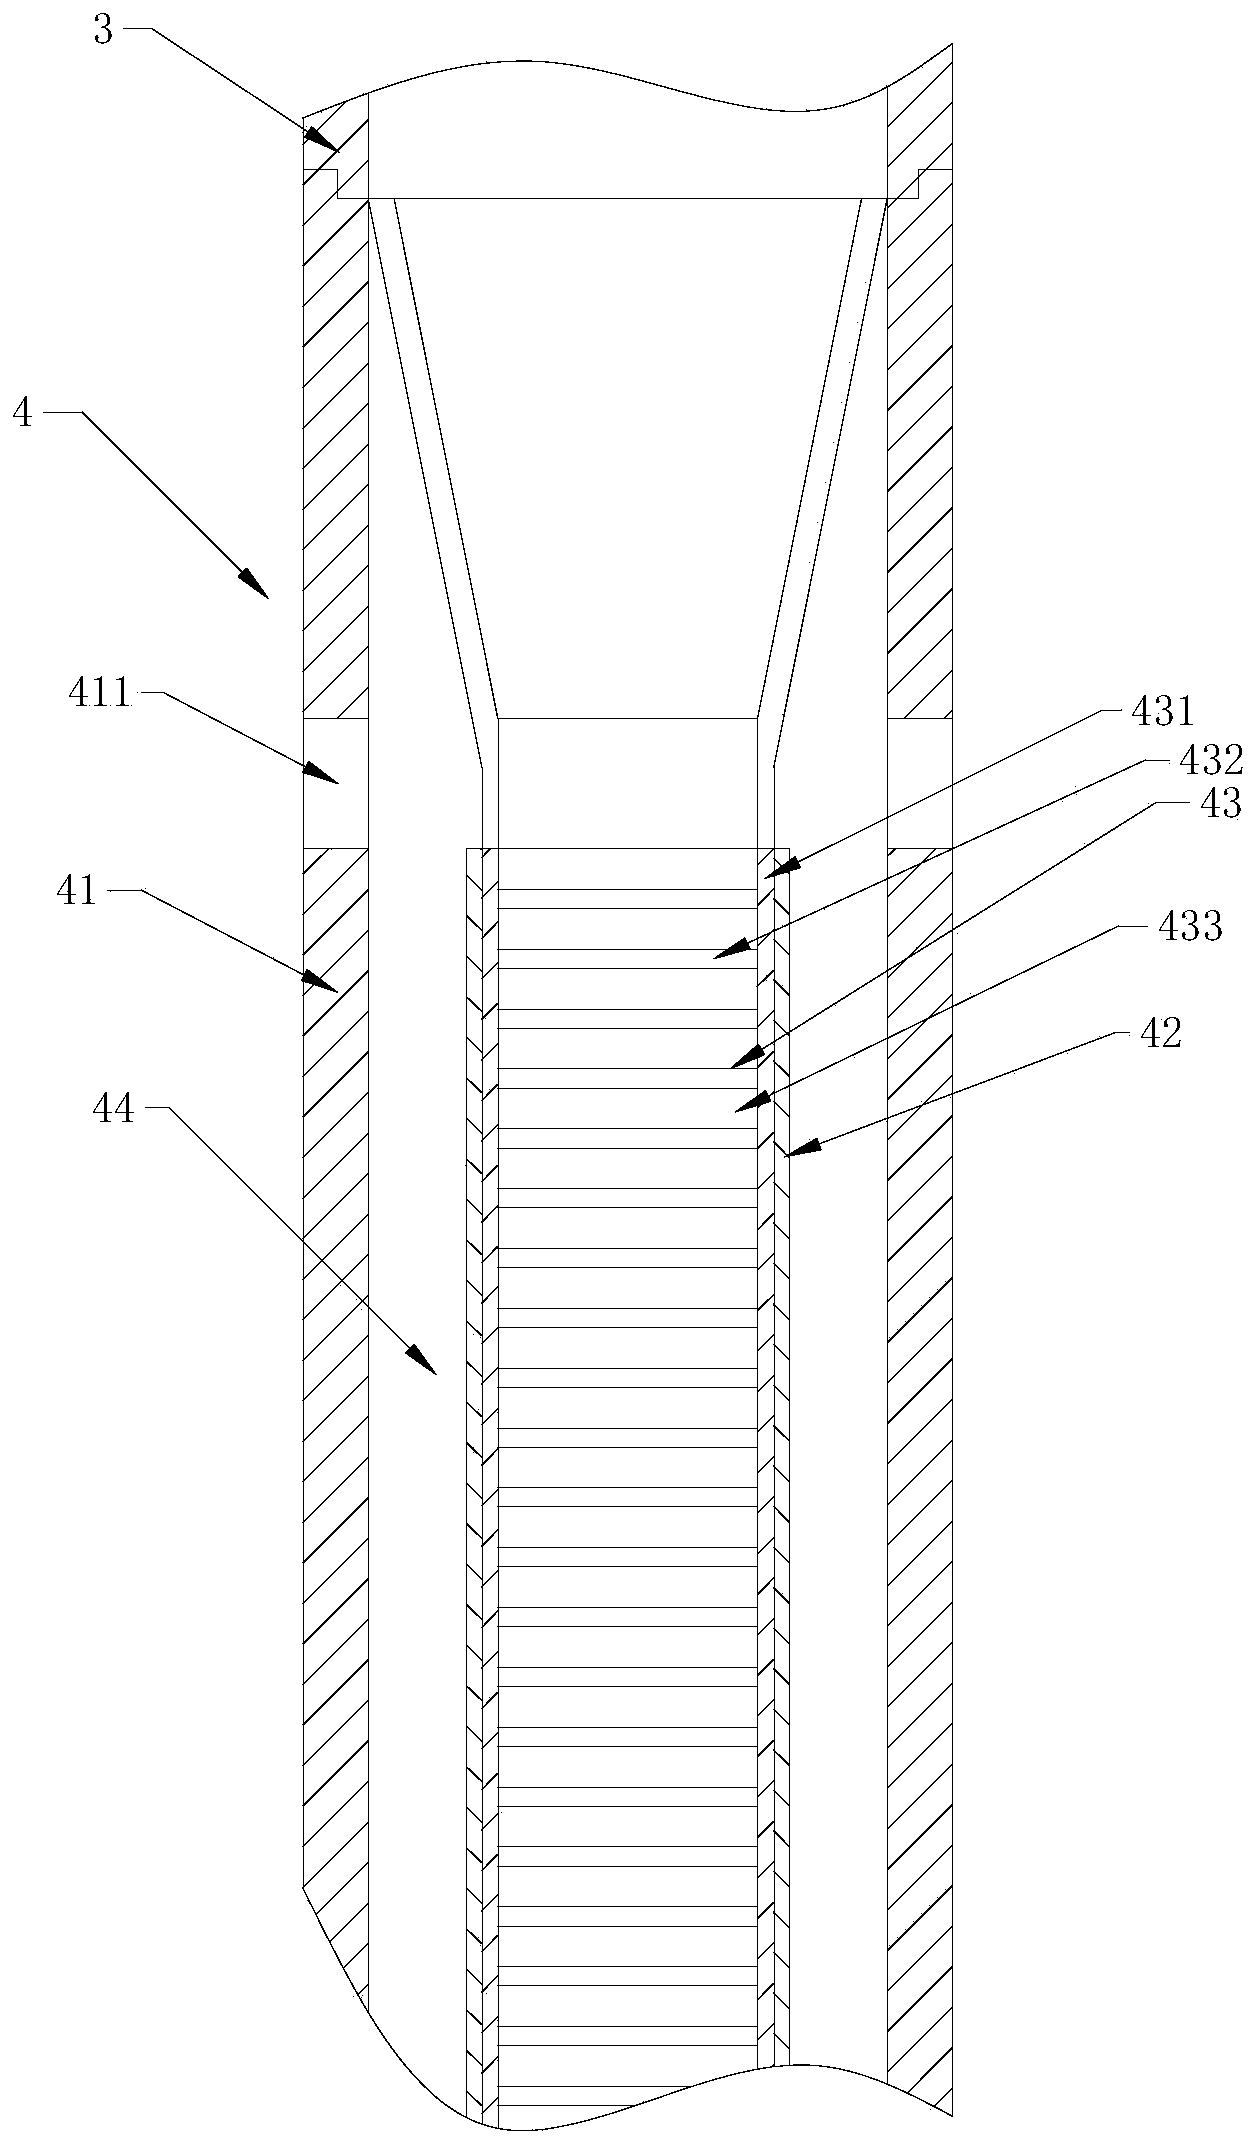 Atmospheric dust concentration measurement equipment and method